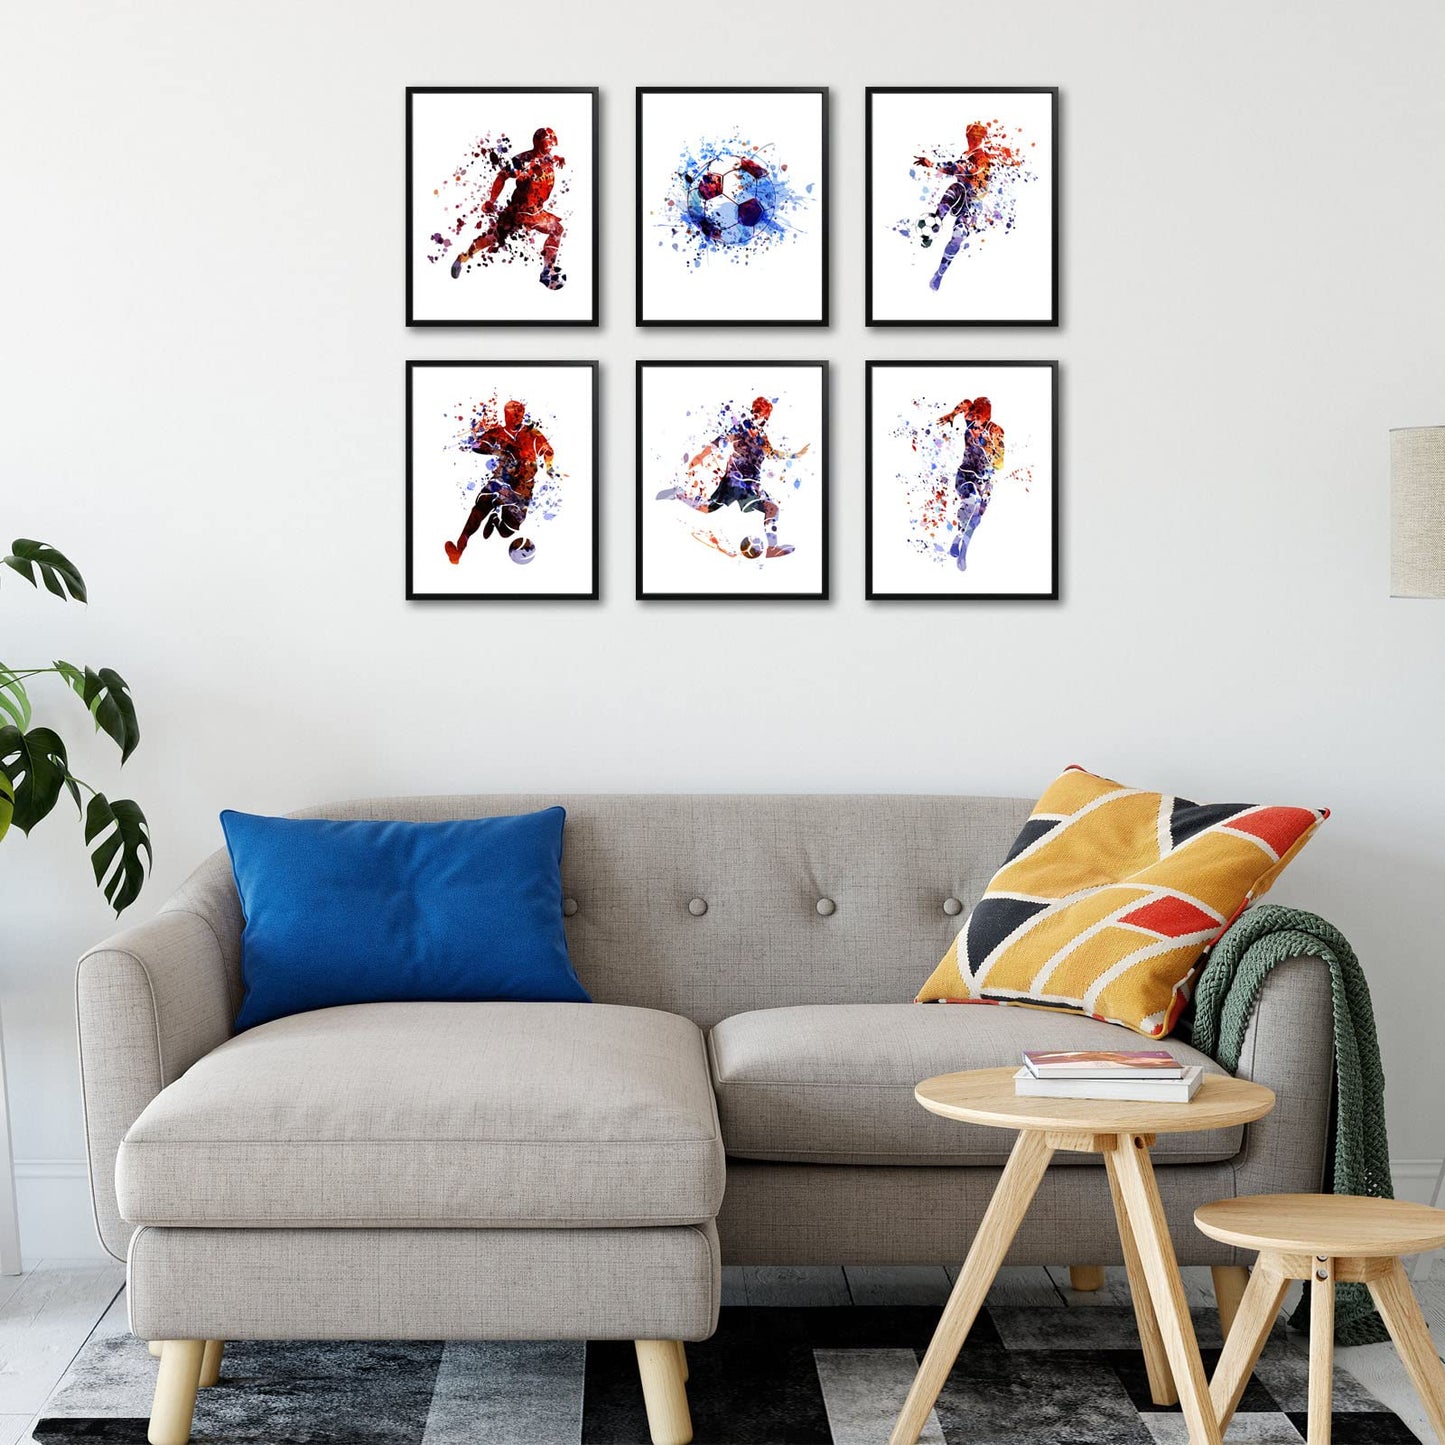 Annande Soccer Players Posters Sport Watercolor Canvas Wall Art Prints Minimalist Pictures for Men Cave Boys Room Decor, 8x10in Unframed